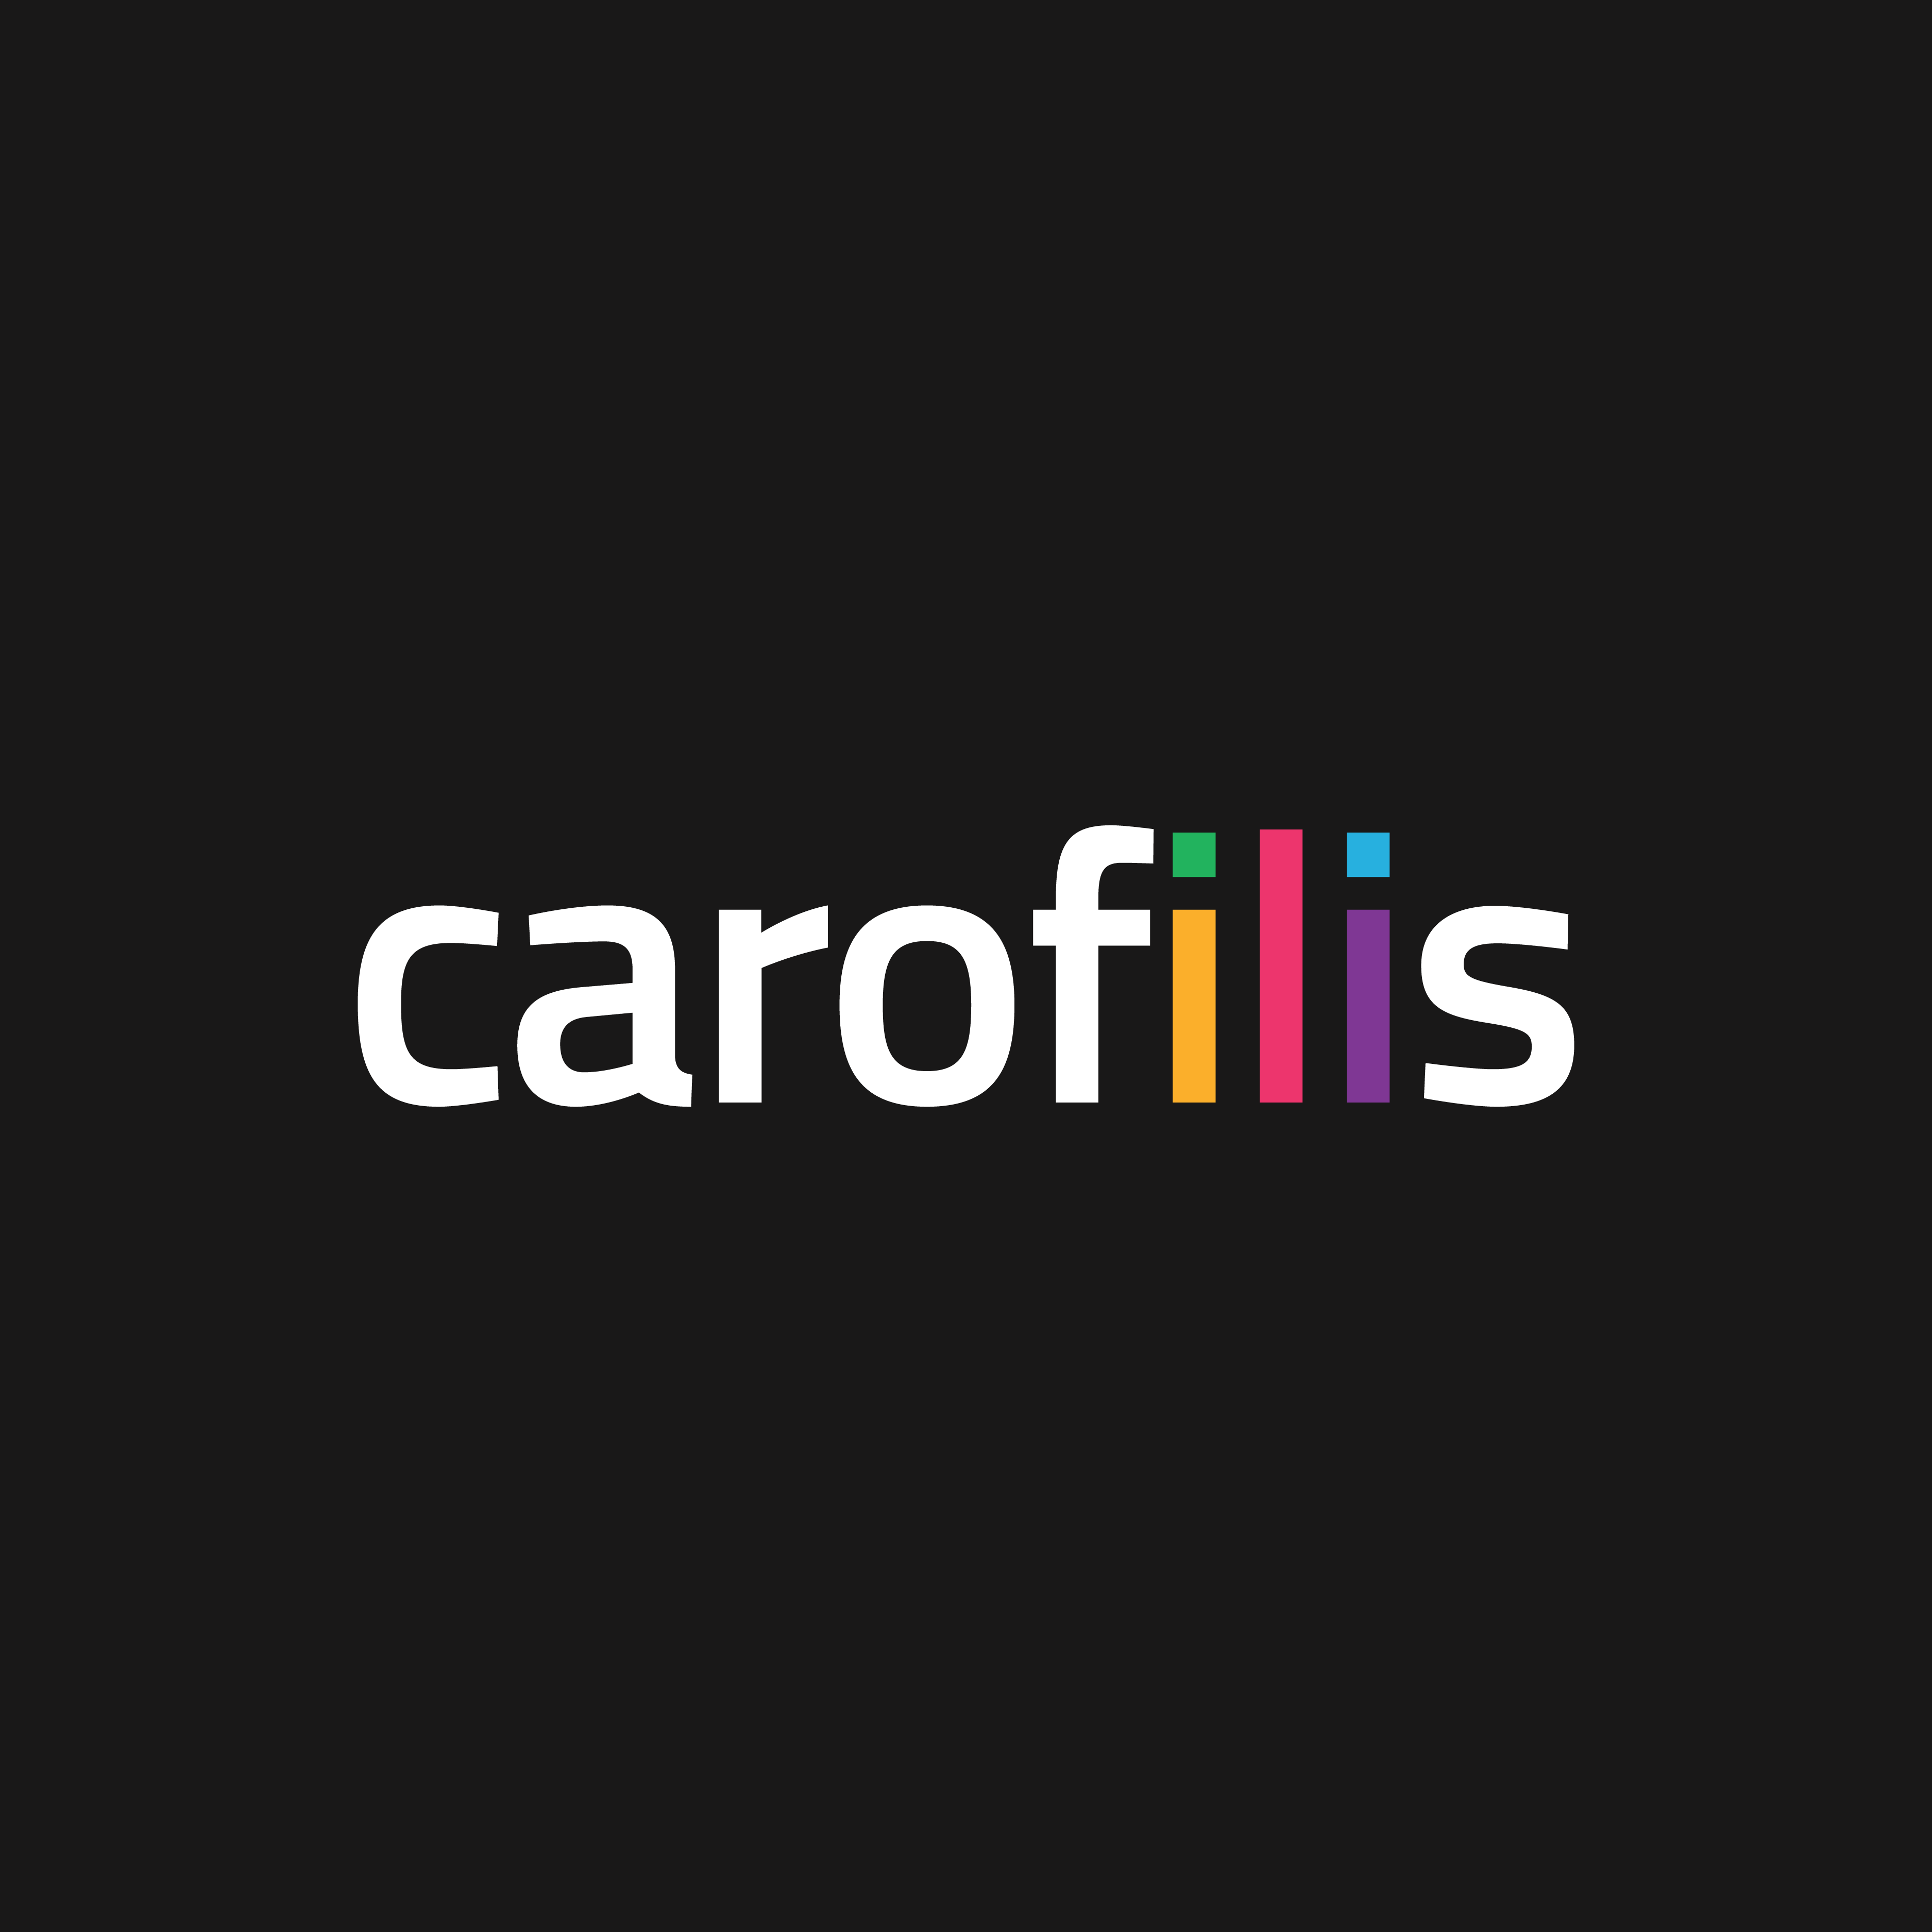 Carofilis  logo design by logo designer Anthony Alava for your inspiration and for the worlds largest logo competition